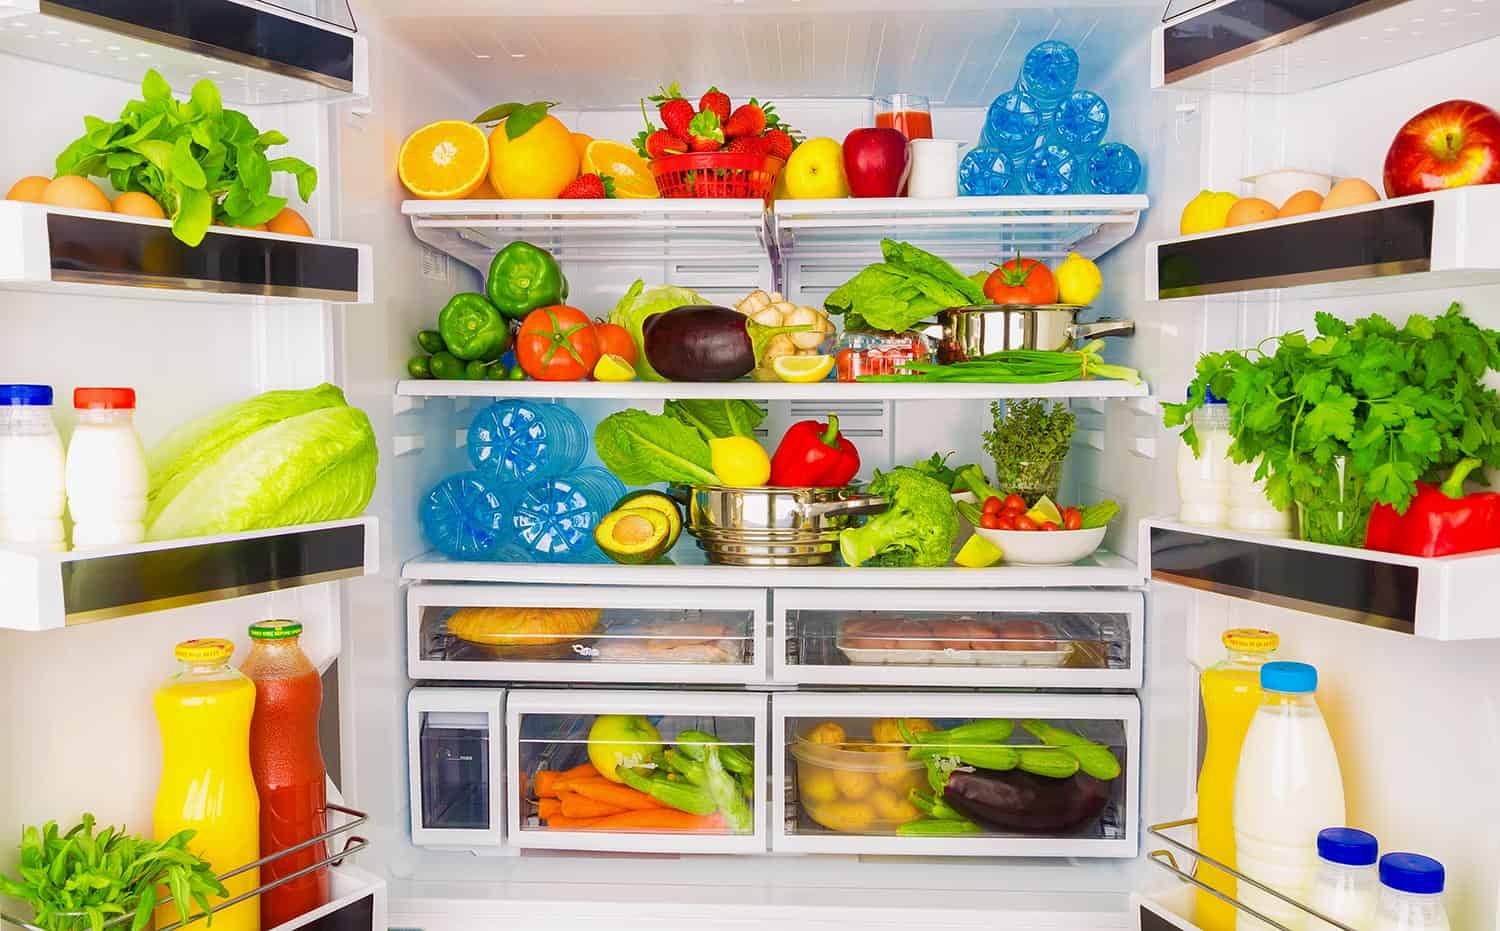 Full open fridge with lots of vegetables